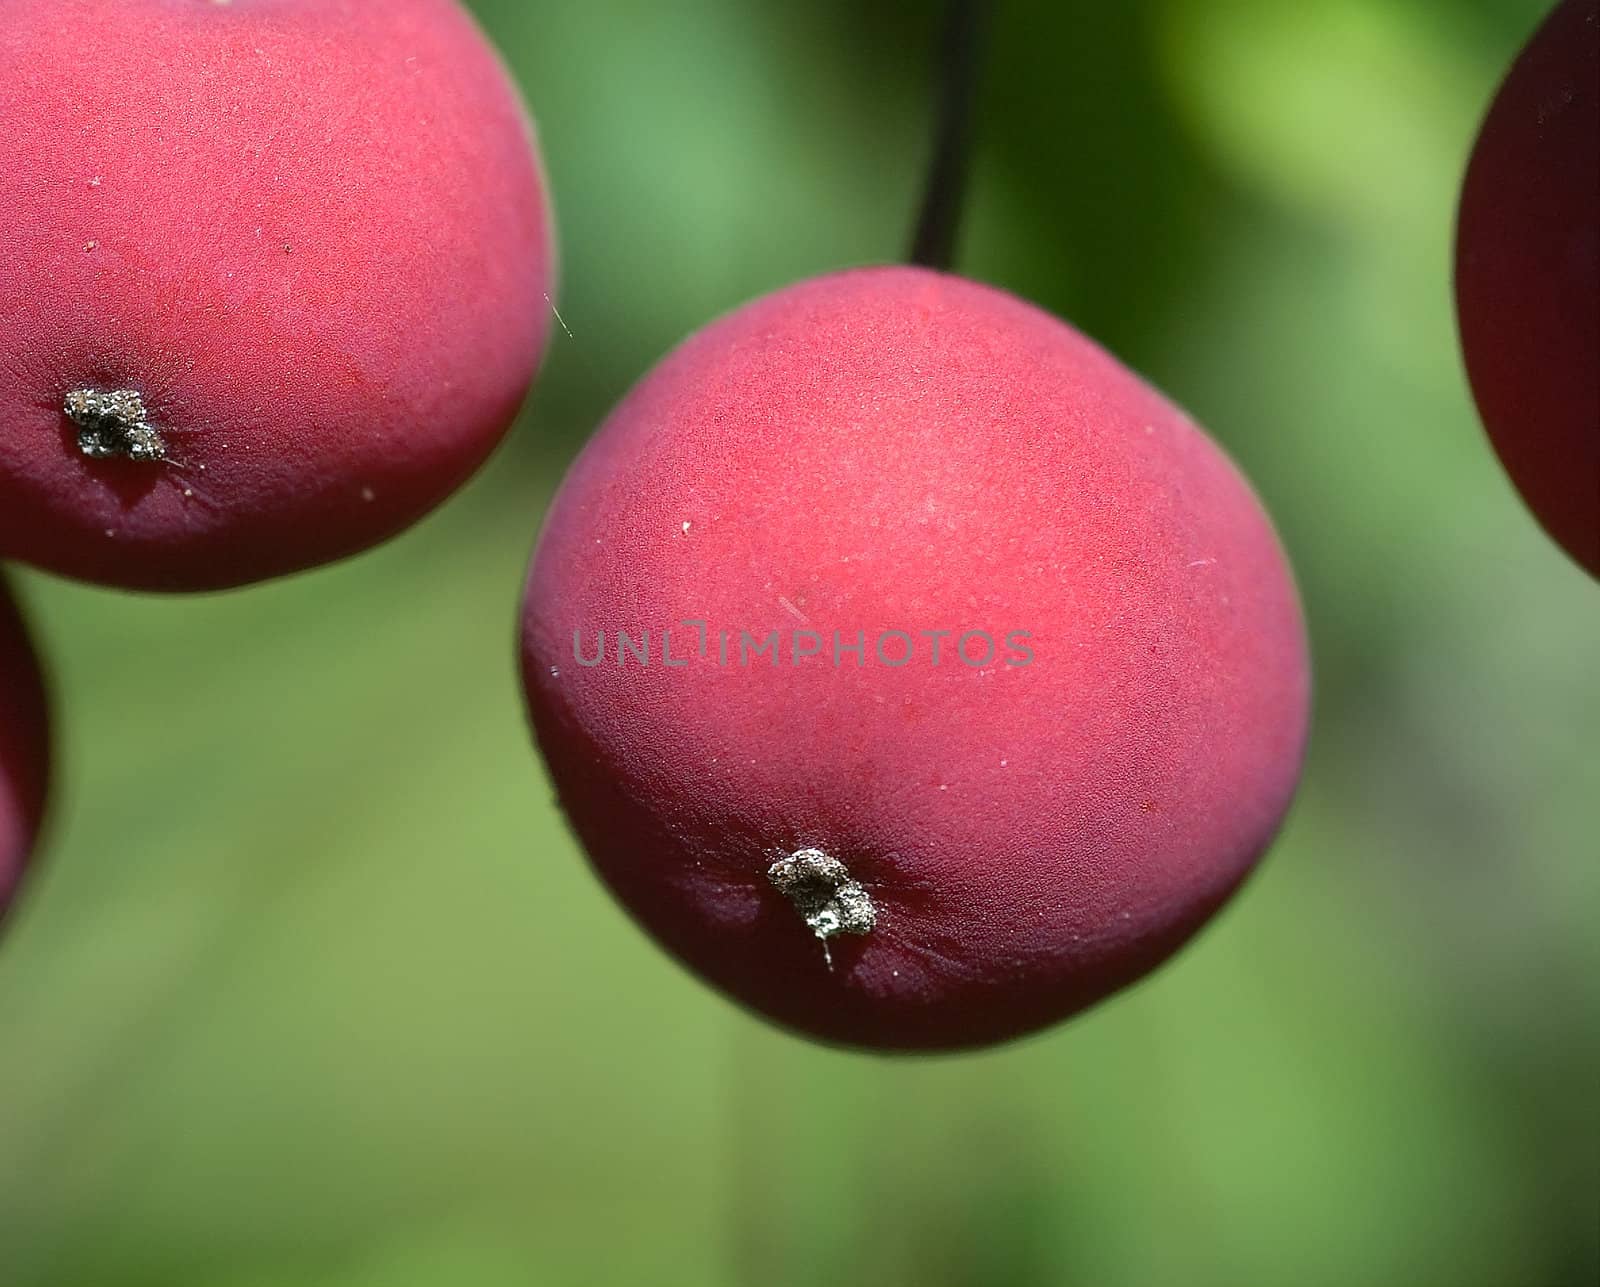 Closeup pictures of some small red wild fruits